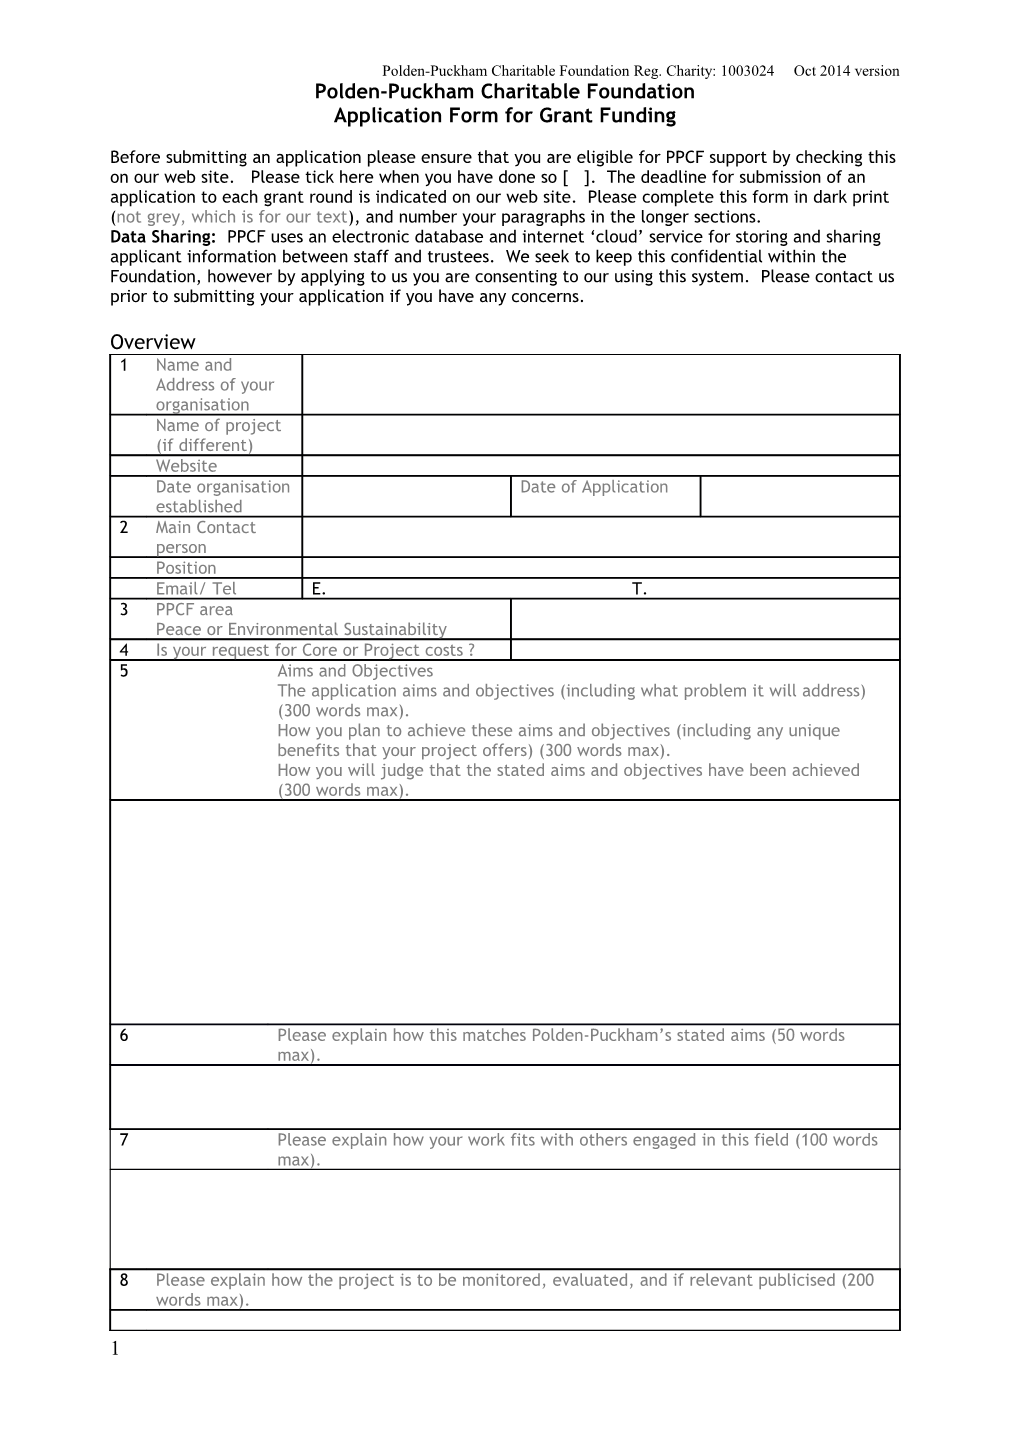 Polden-Puckham Charitable Foundation (PPCF) Follow up Form